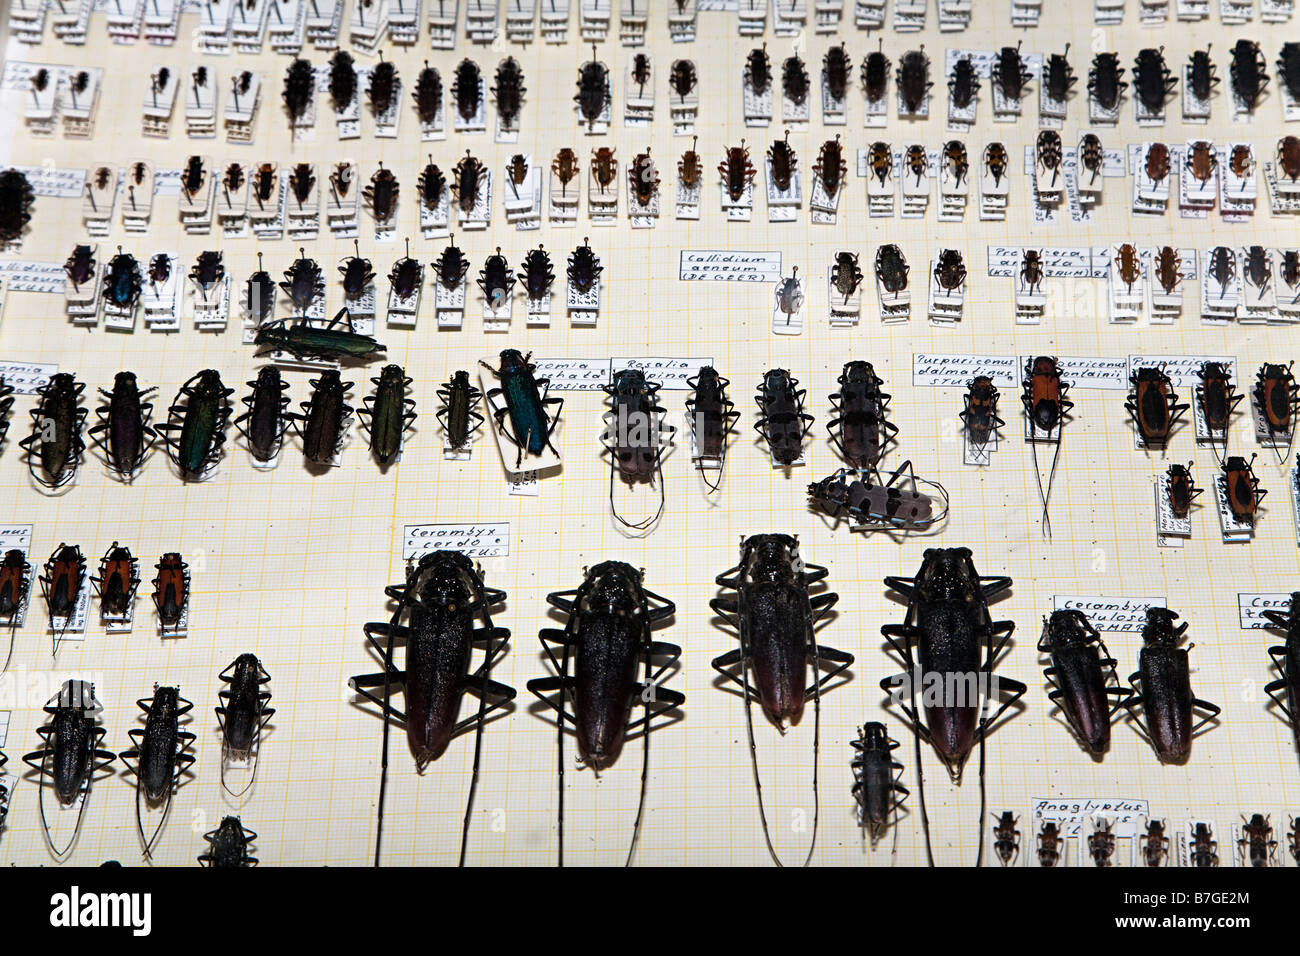 Beetle collection in museum display Germany Stock Photo